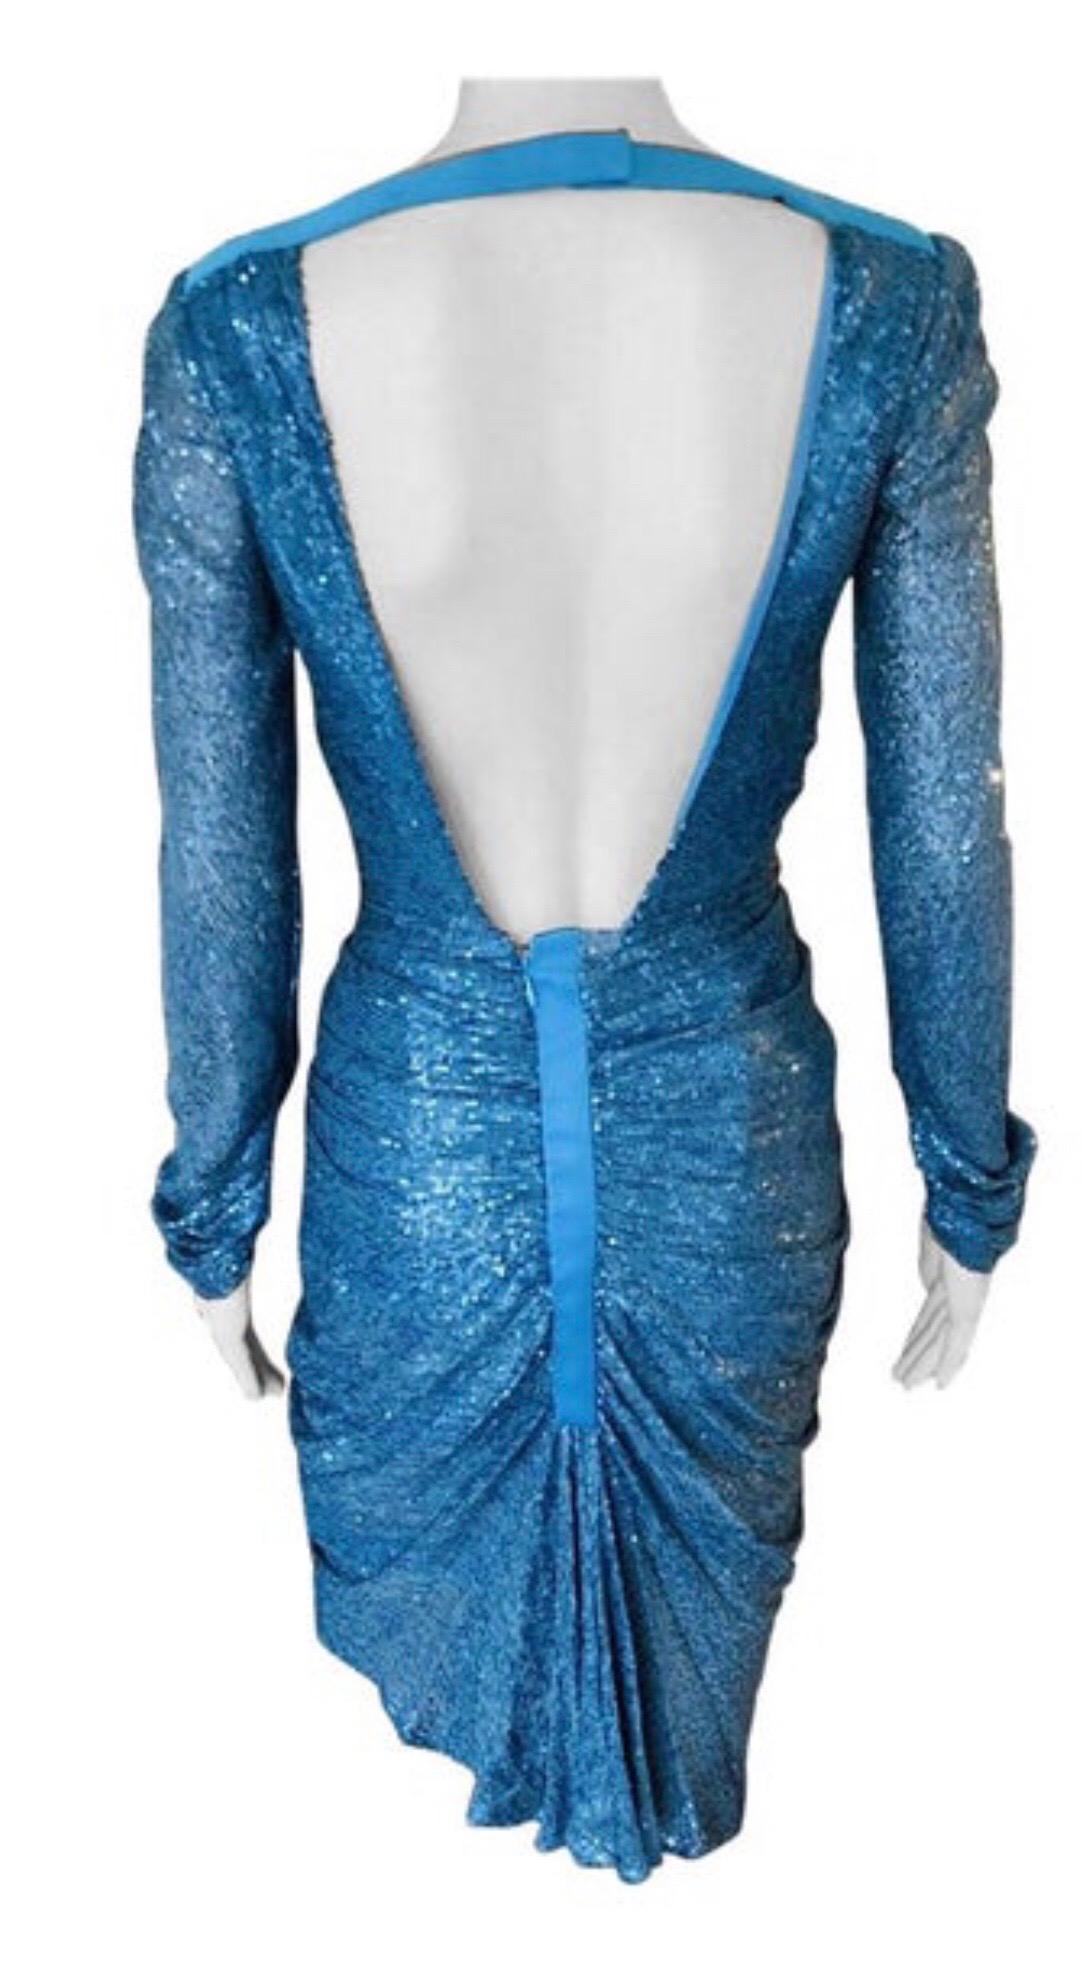 Gianni Versace S/S 2001 Runway Blue Sequin Embellished Cutout Back Dress Gown In Excellent Condition For Sale In Naples, FL